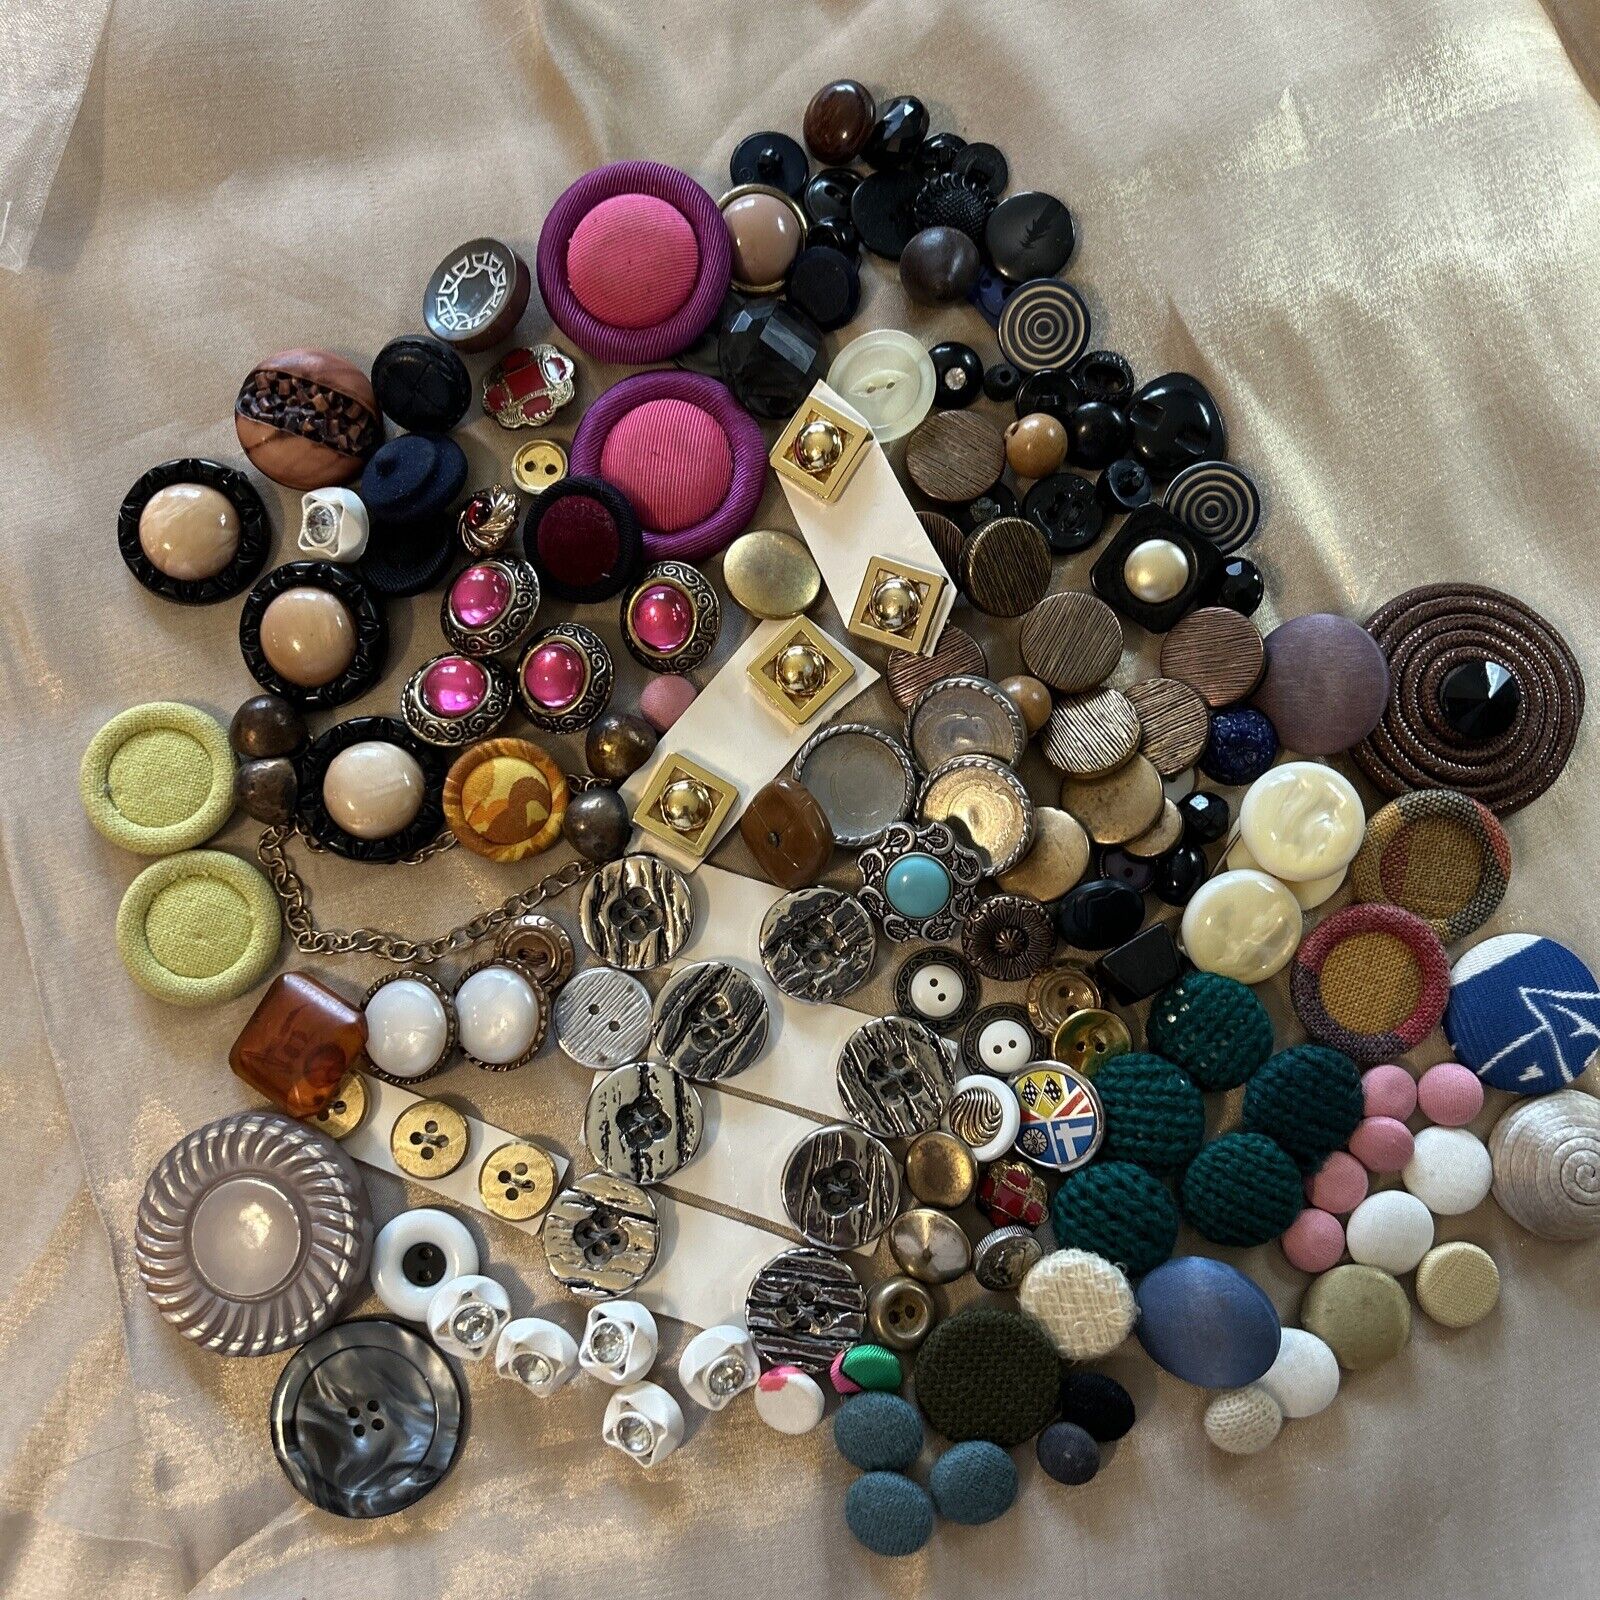 Vintage Buttons Lot Of 150 Mixed Buttons All Colors Some Fabric Covered